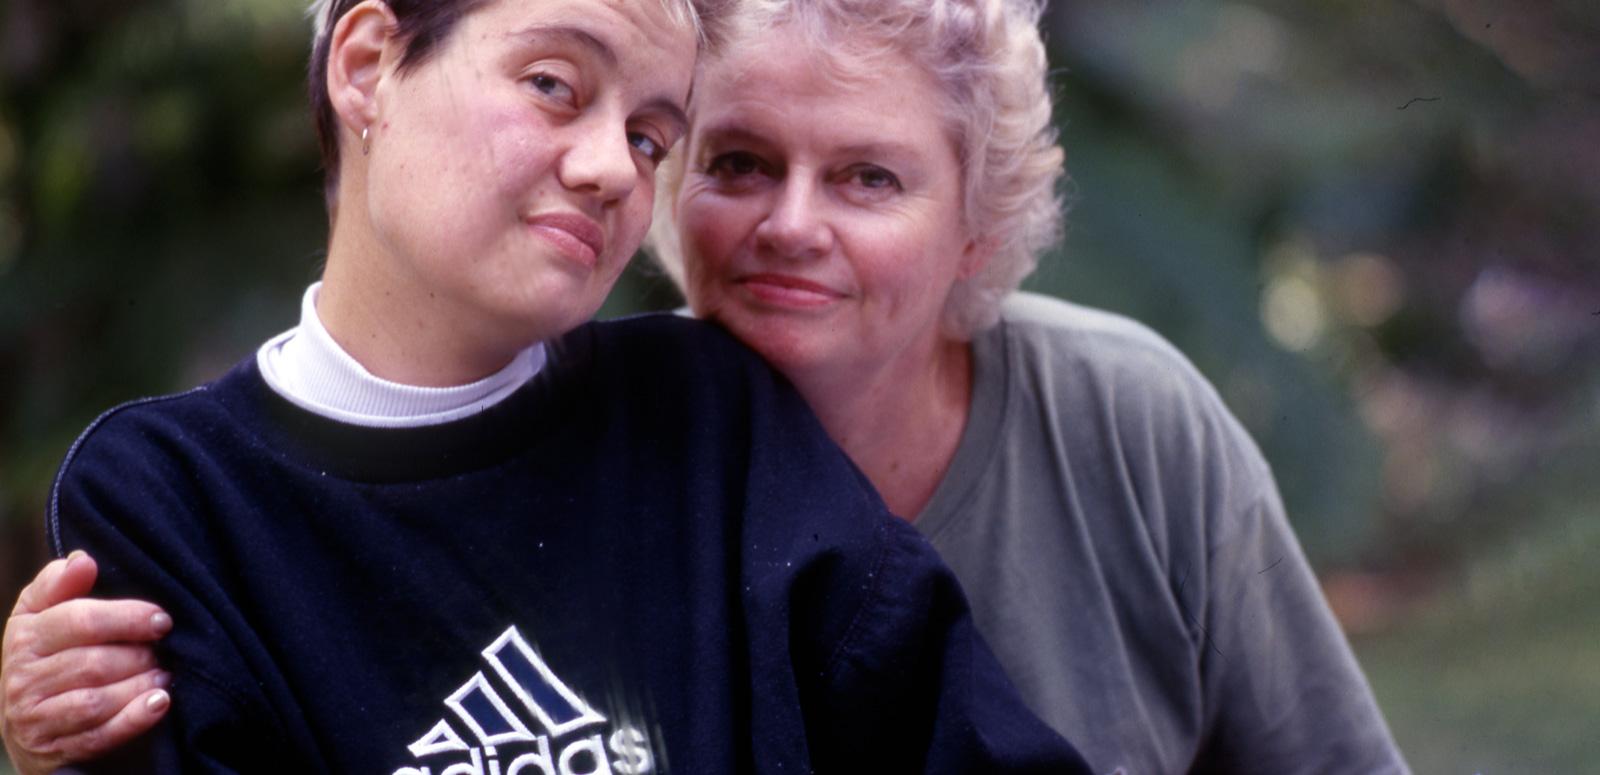 A young woman with short blond hair, wearing a black jumper is embraced by an older blond lady. They are looking at the camera.